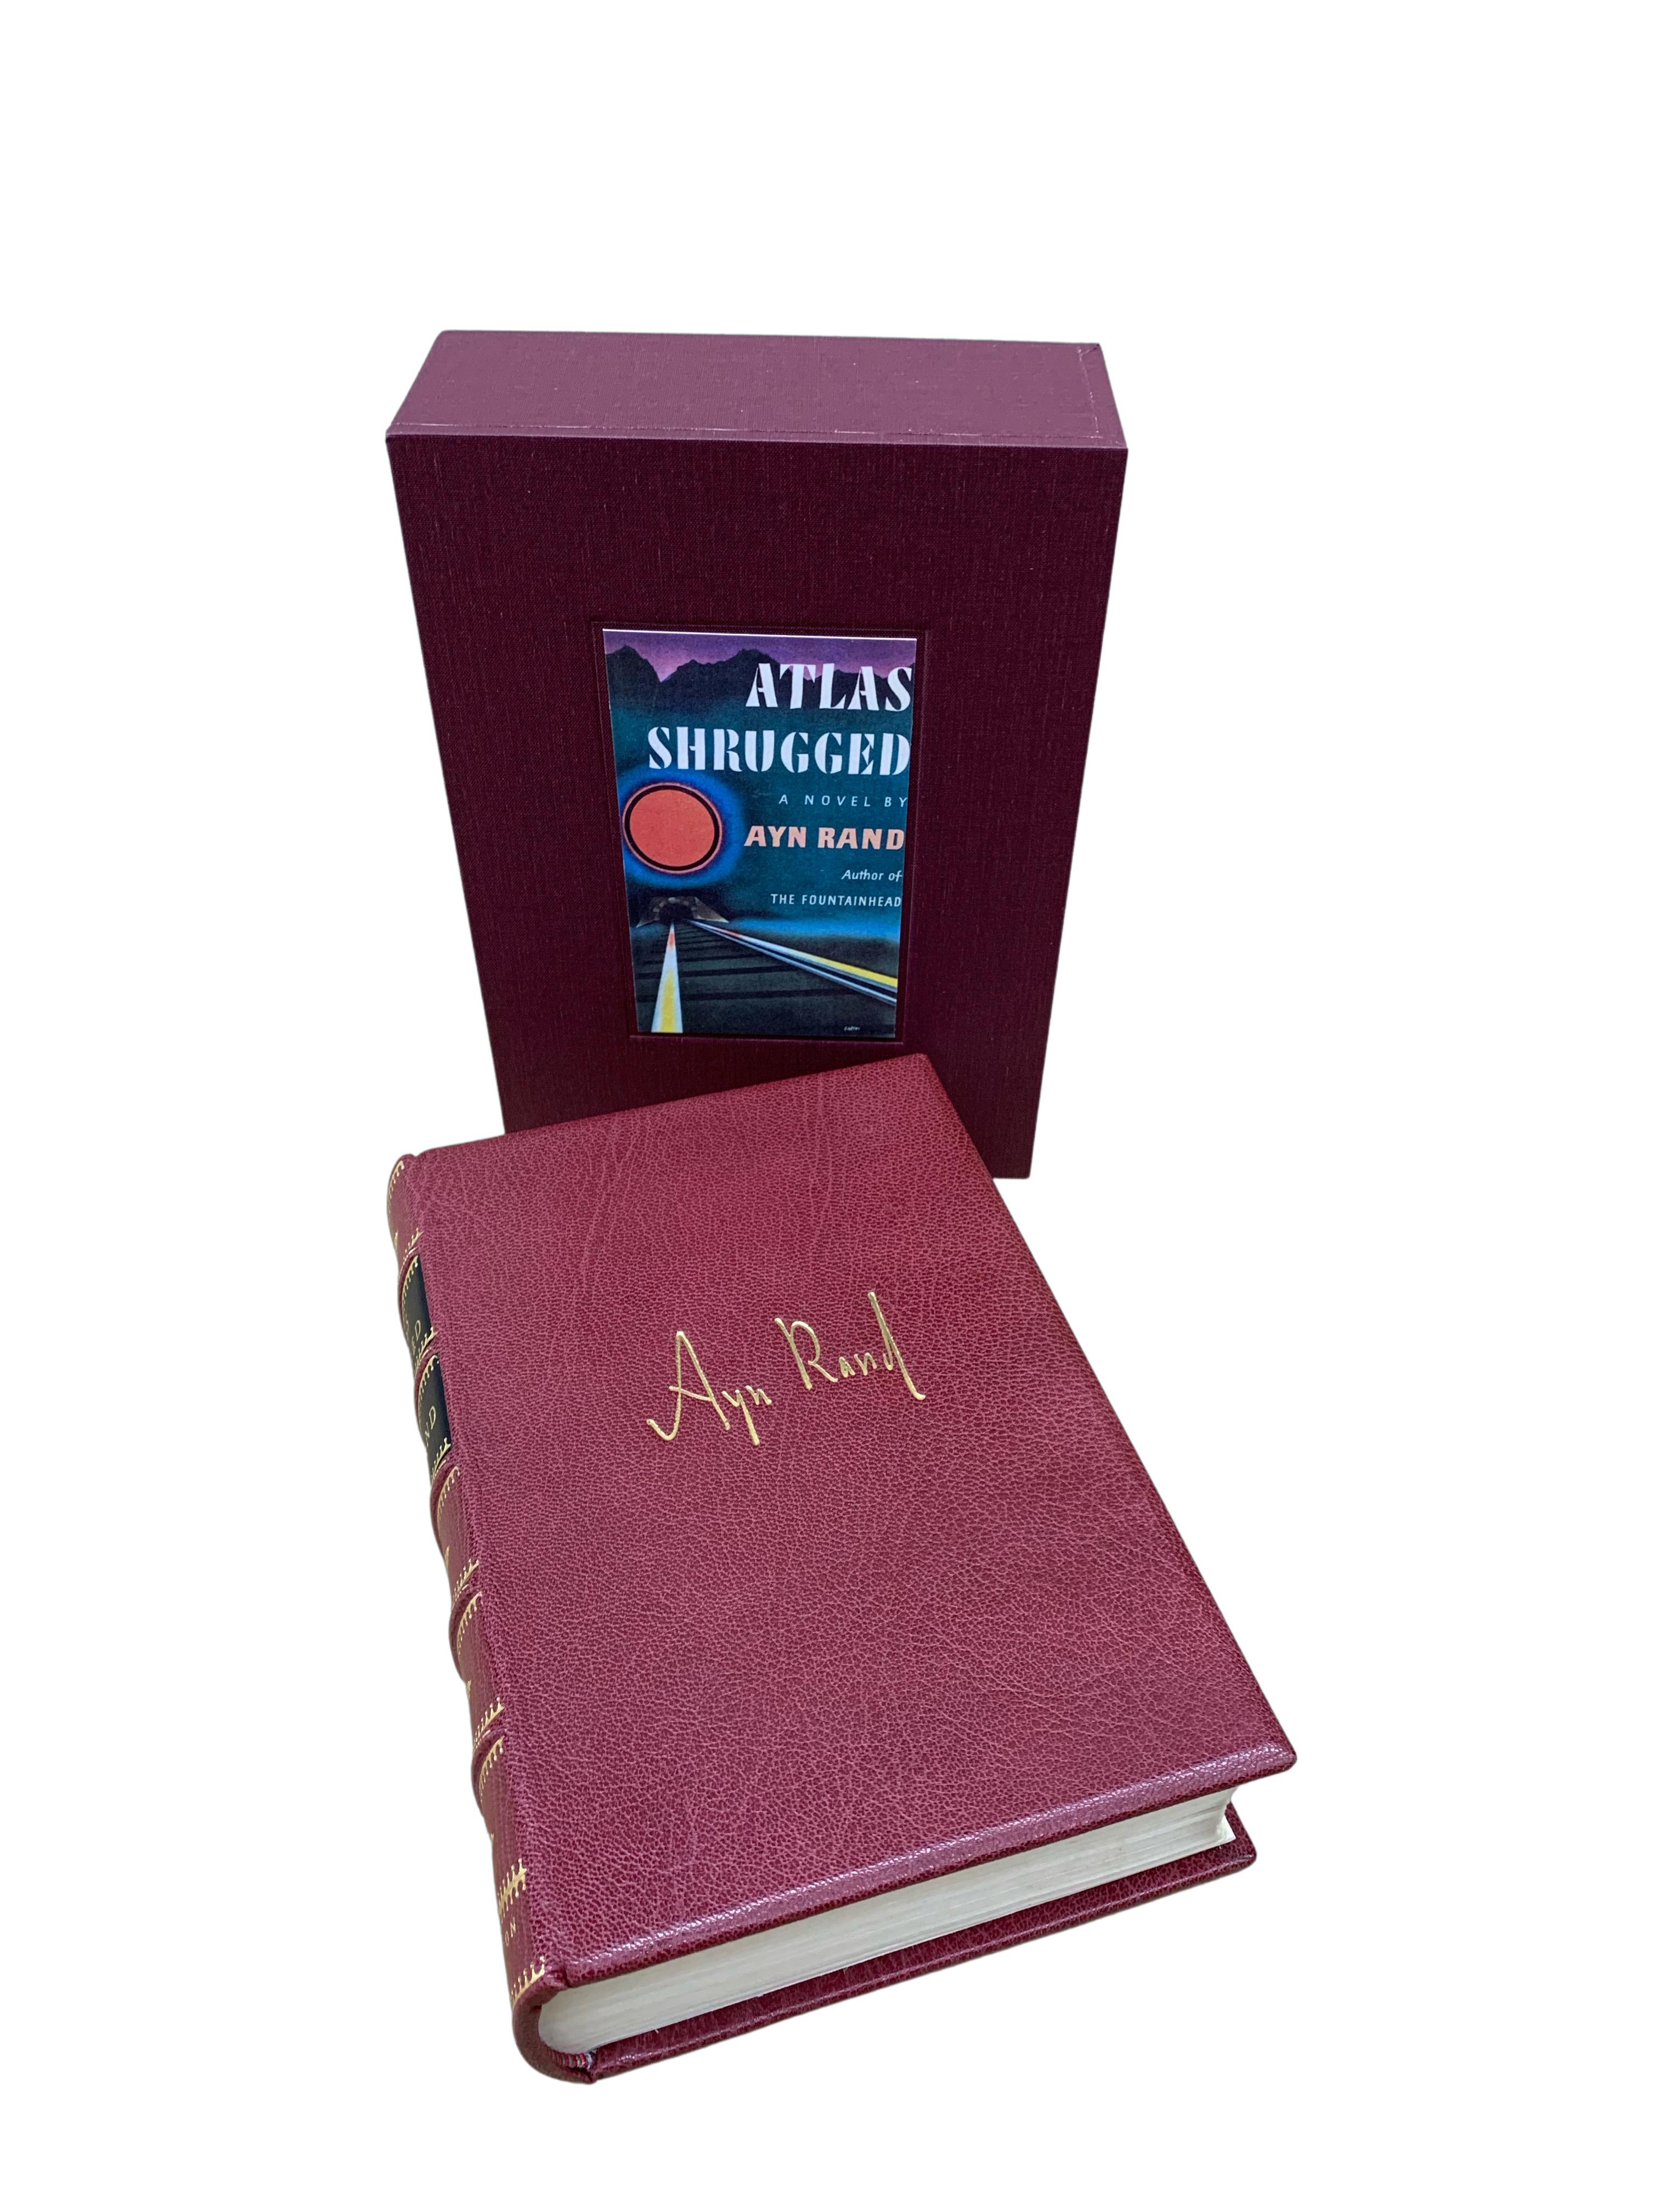 Atlas Shrugged by Ayn Rand, First Edition, First Printing, 1957

Rand, Ayn. Atlas Shrugged. New York: Random House, 1957. First edition, first impression. Octavo printing. Rebound in full Moroccan leather with raised bands and gilt titles to the